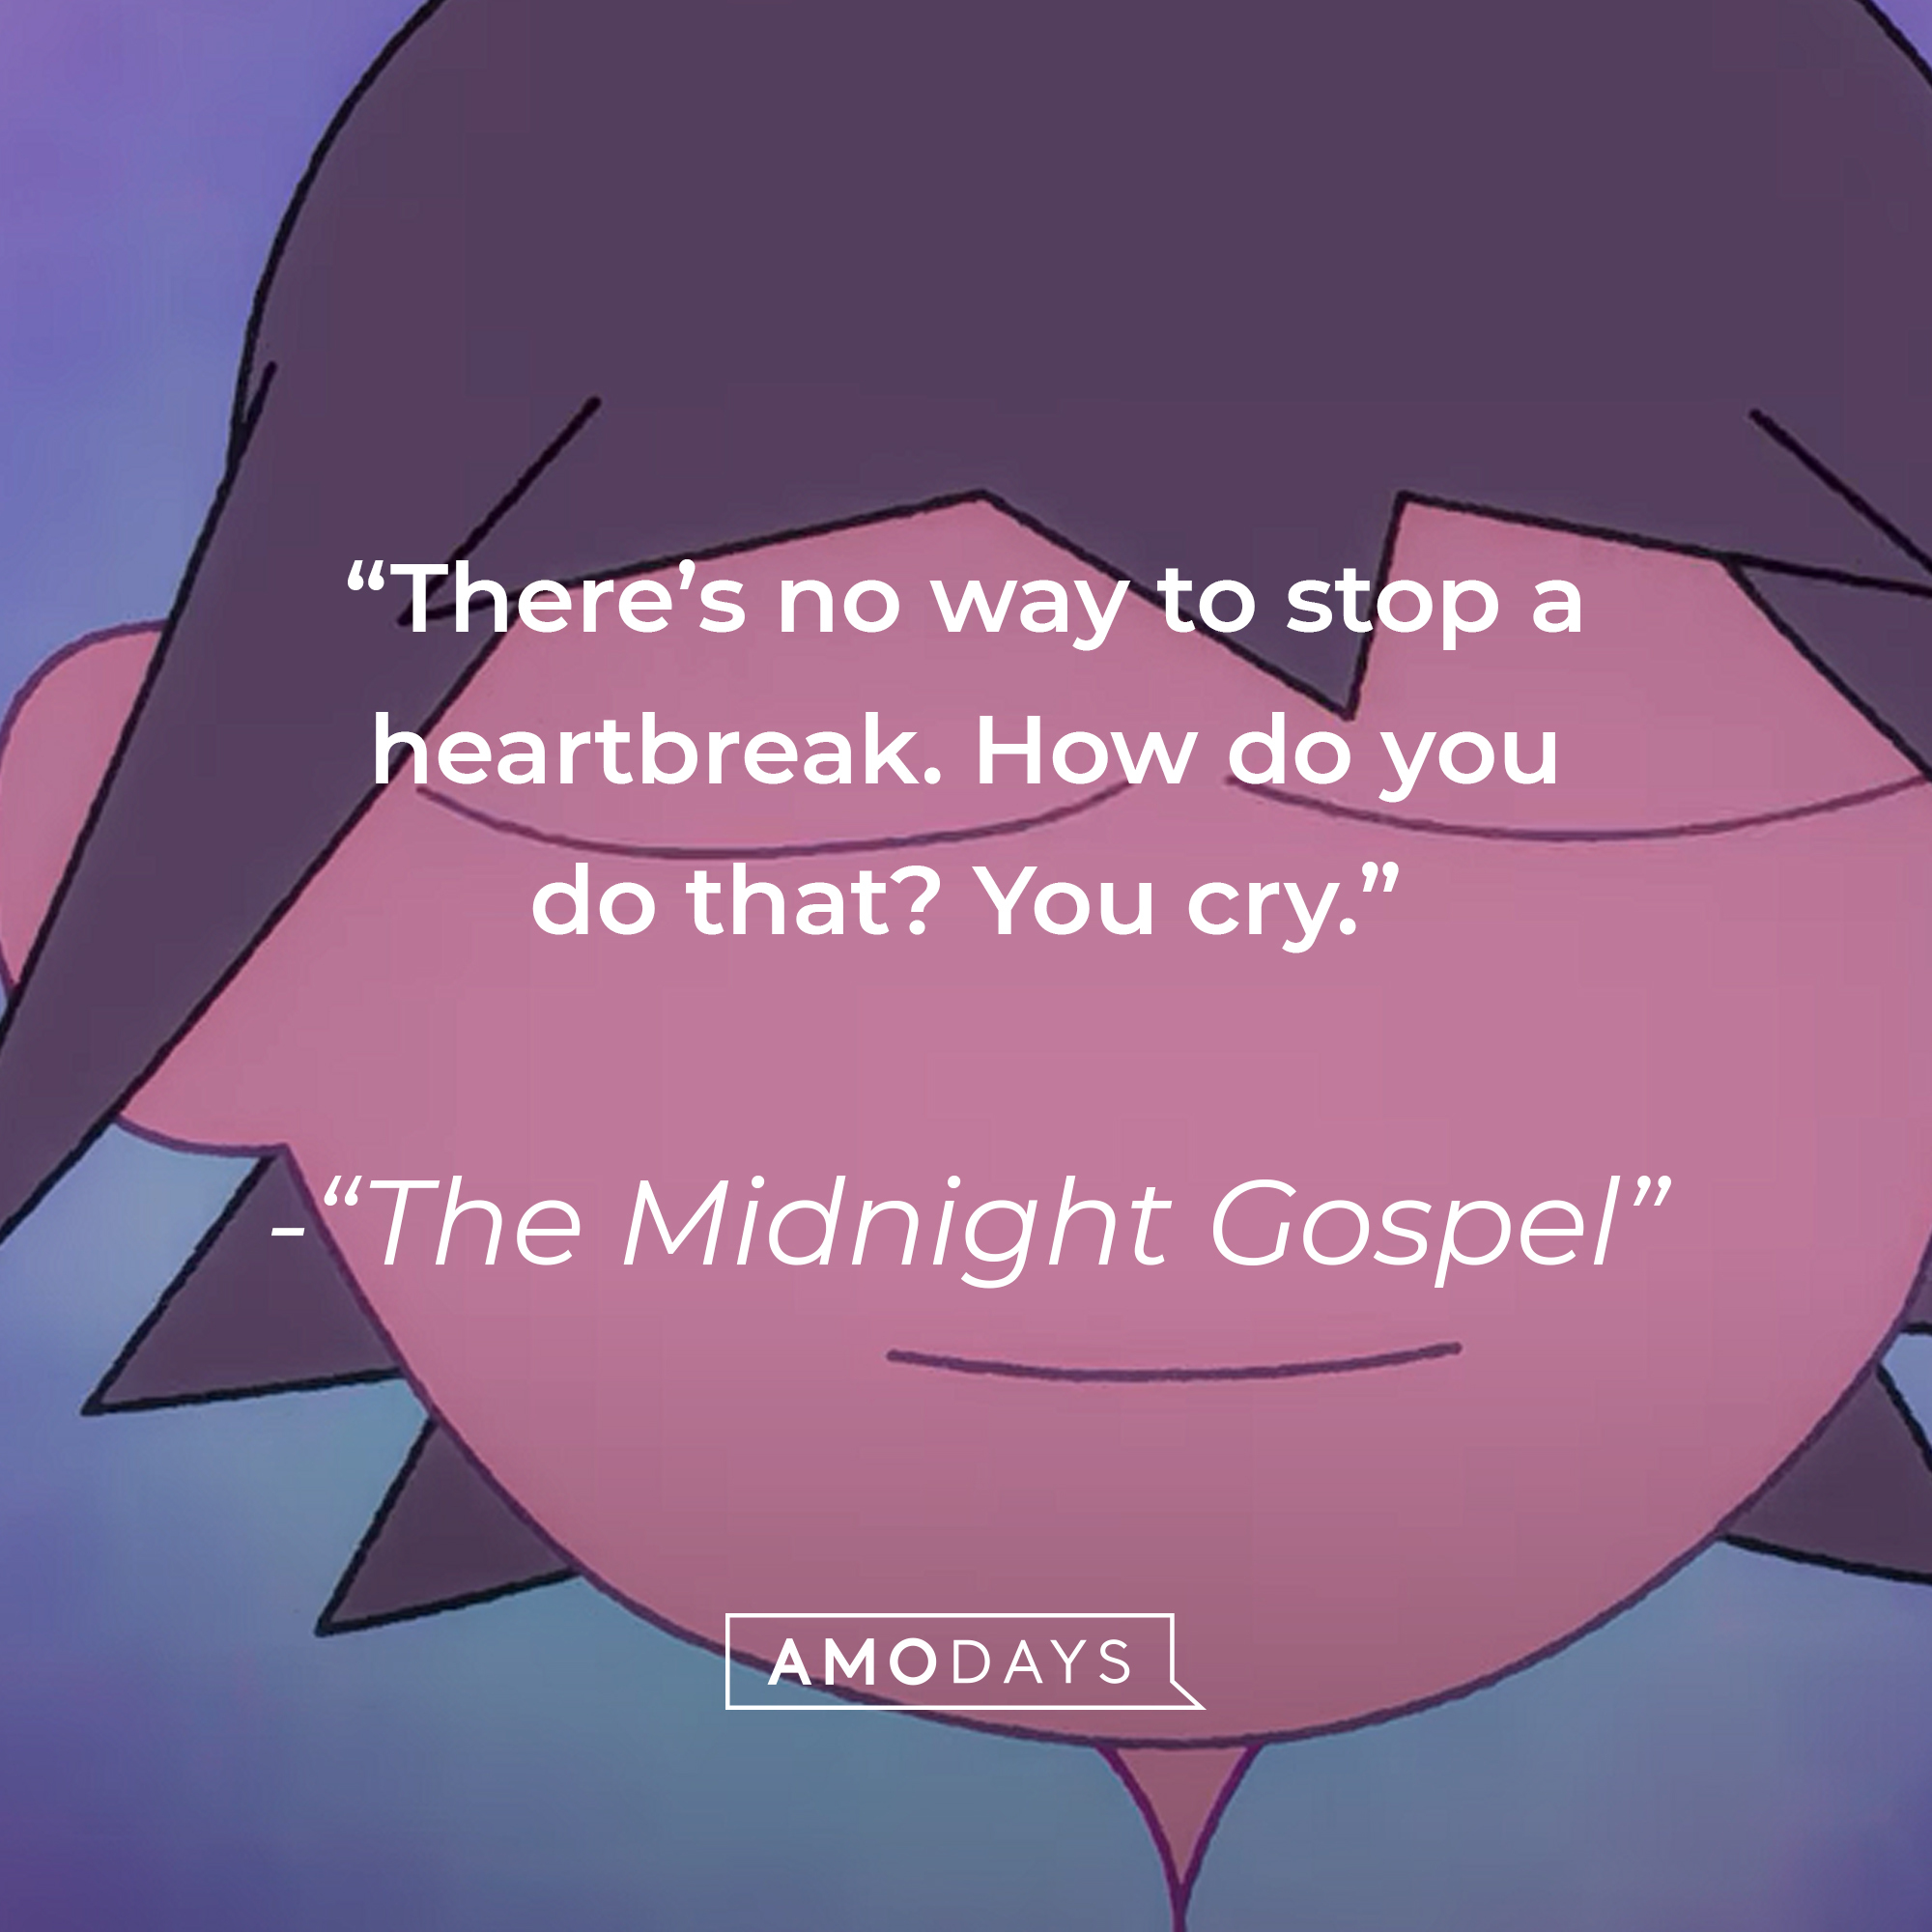 Quote from "The Midnight gospel": "There’s No Way To Stop A Heartbreak. How Do You Do That? You Cry." | Source: youtube.com/Netflix